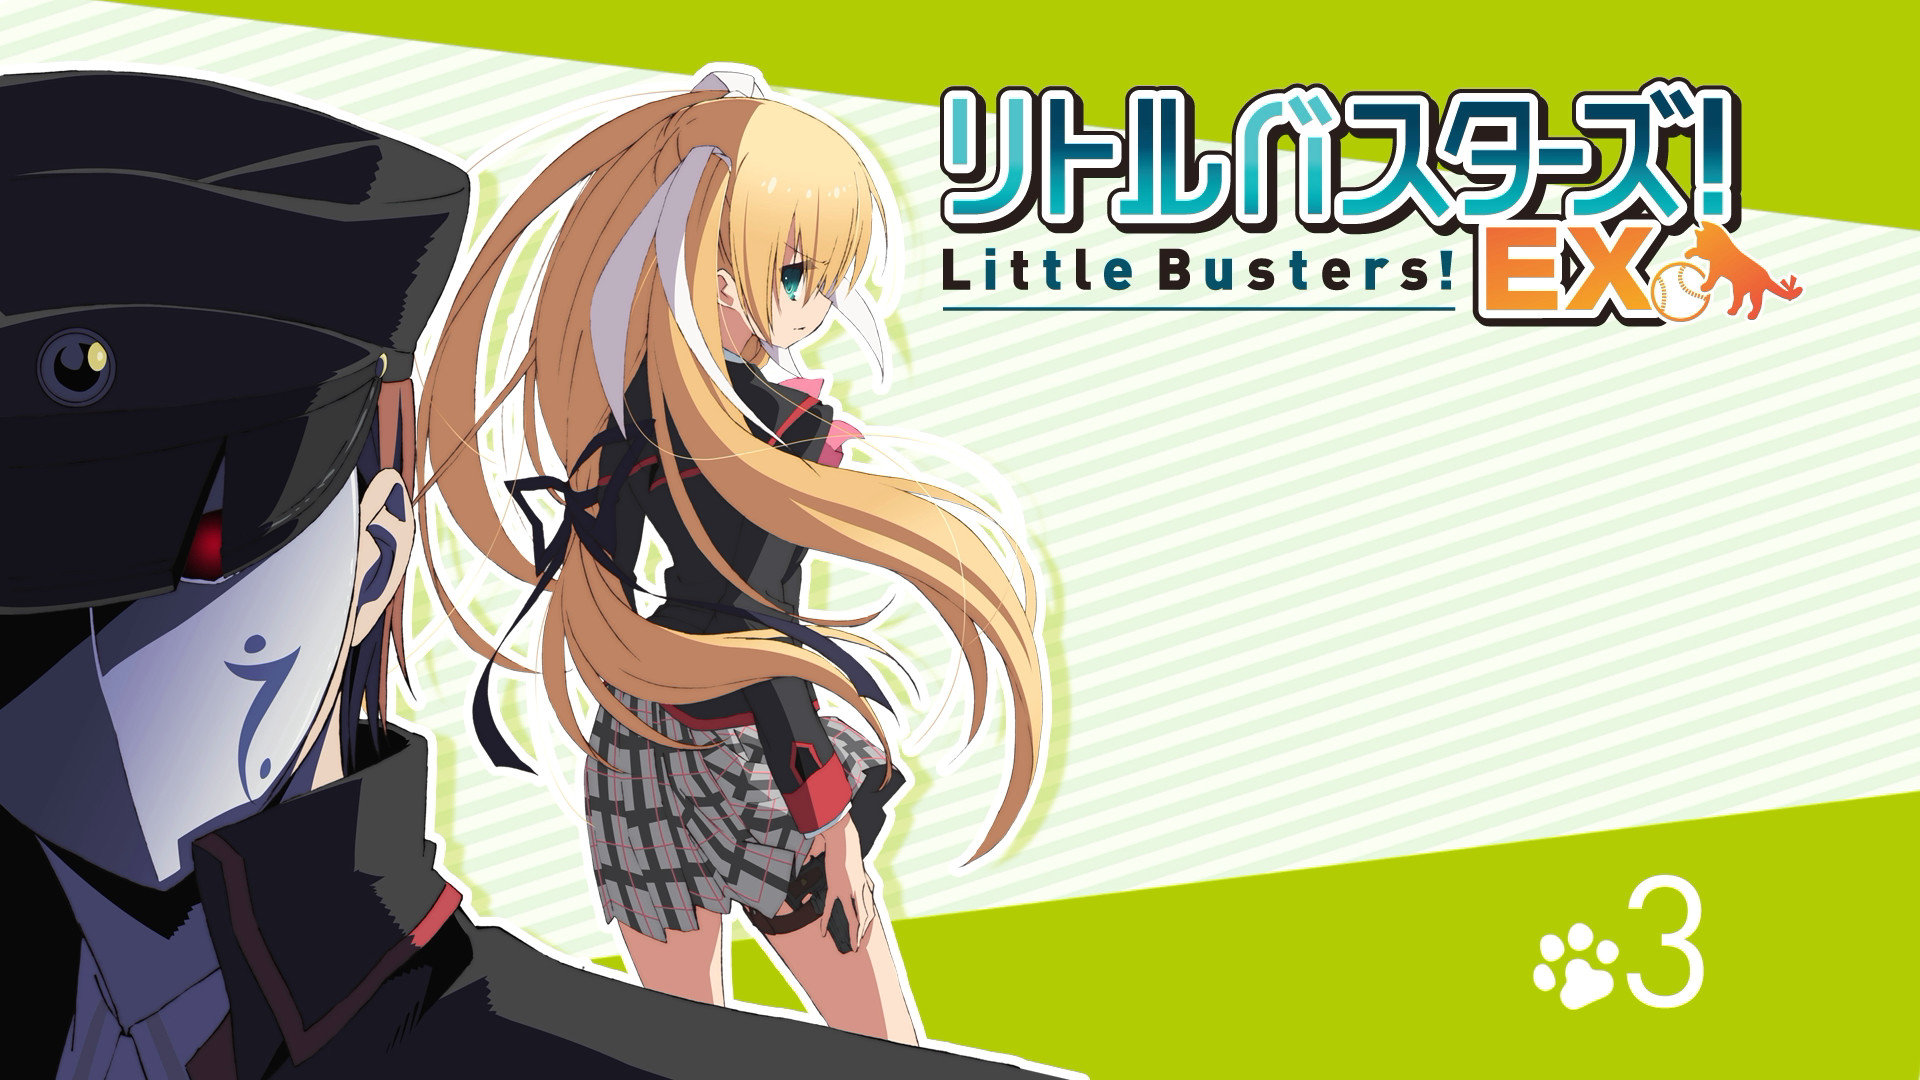 Best Little Busters! wallpaper ID:164815 for High Resolution full hd 1080p PC